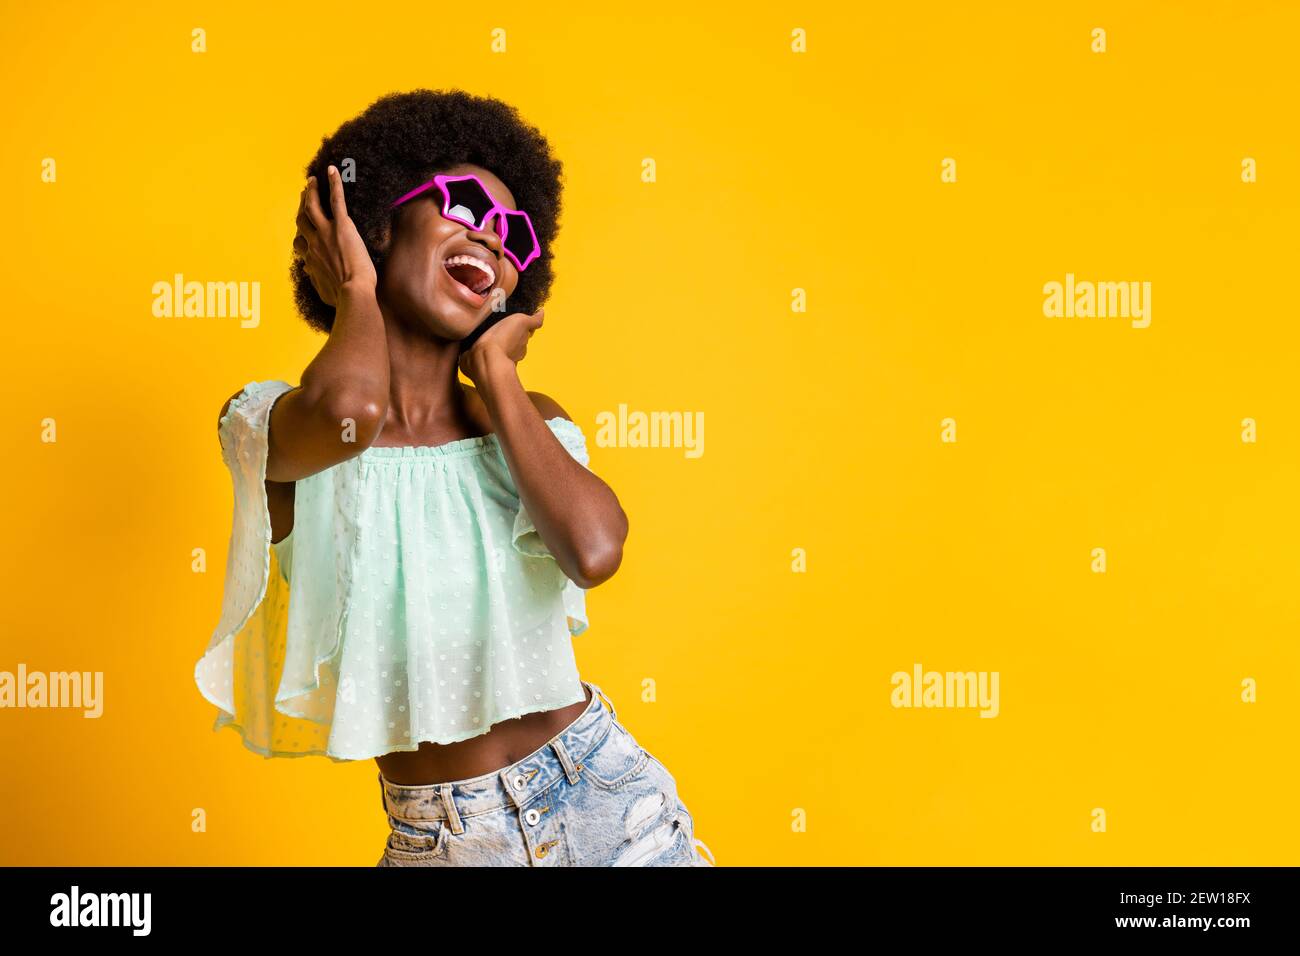 Photo portrait of black skinned girl dancing laughing wearing jeans shorts  teal top isolated on bright yellow color background copyspace Stock Photo -  Alamy